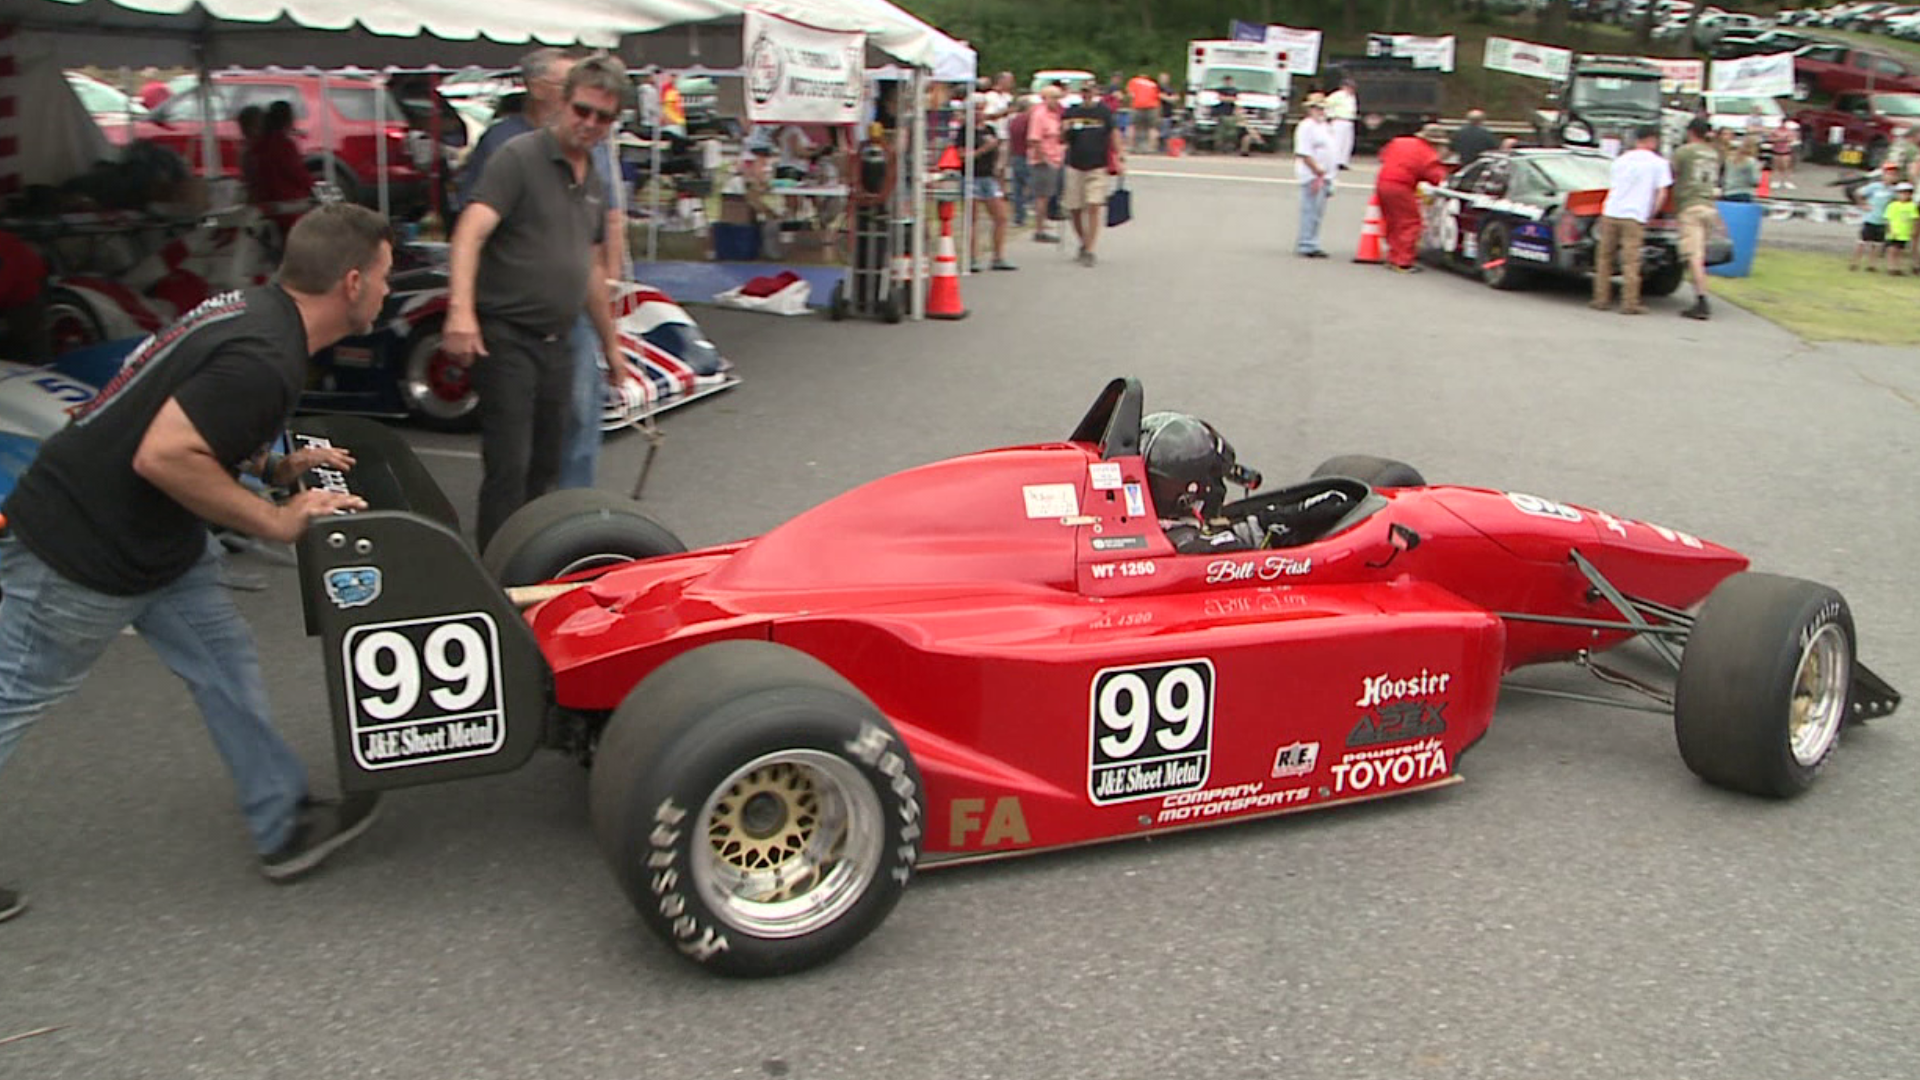 Engines revved as the Giant's Despair Hillclimb, one of the oldest motor racing events in the world, returned to our area this weekend.